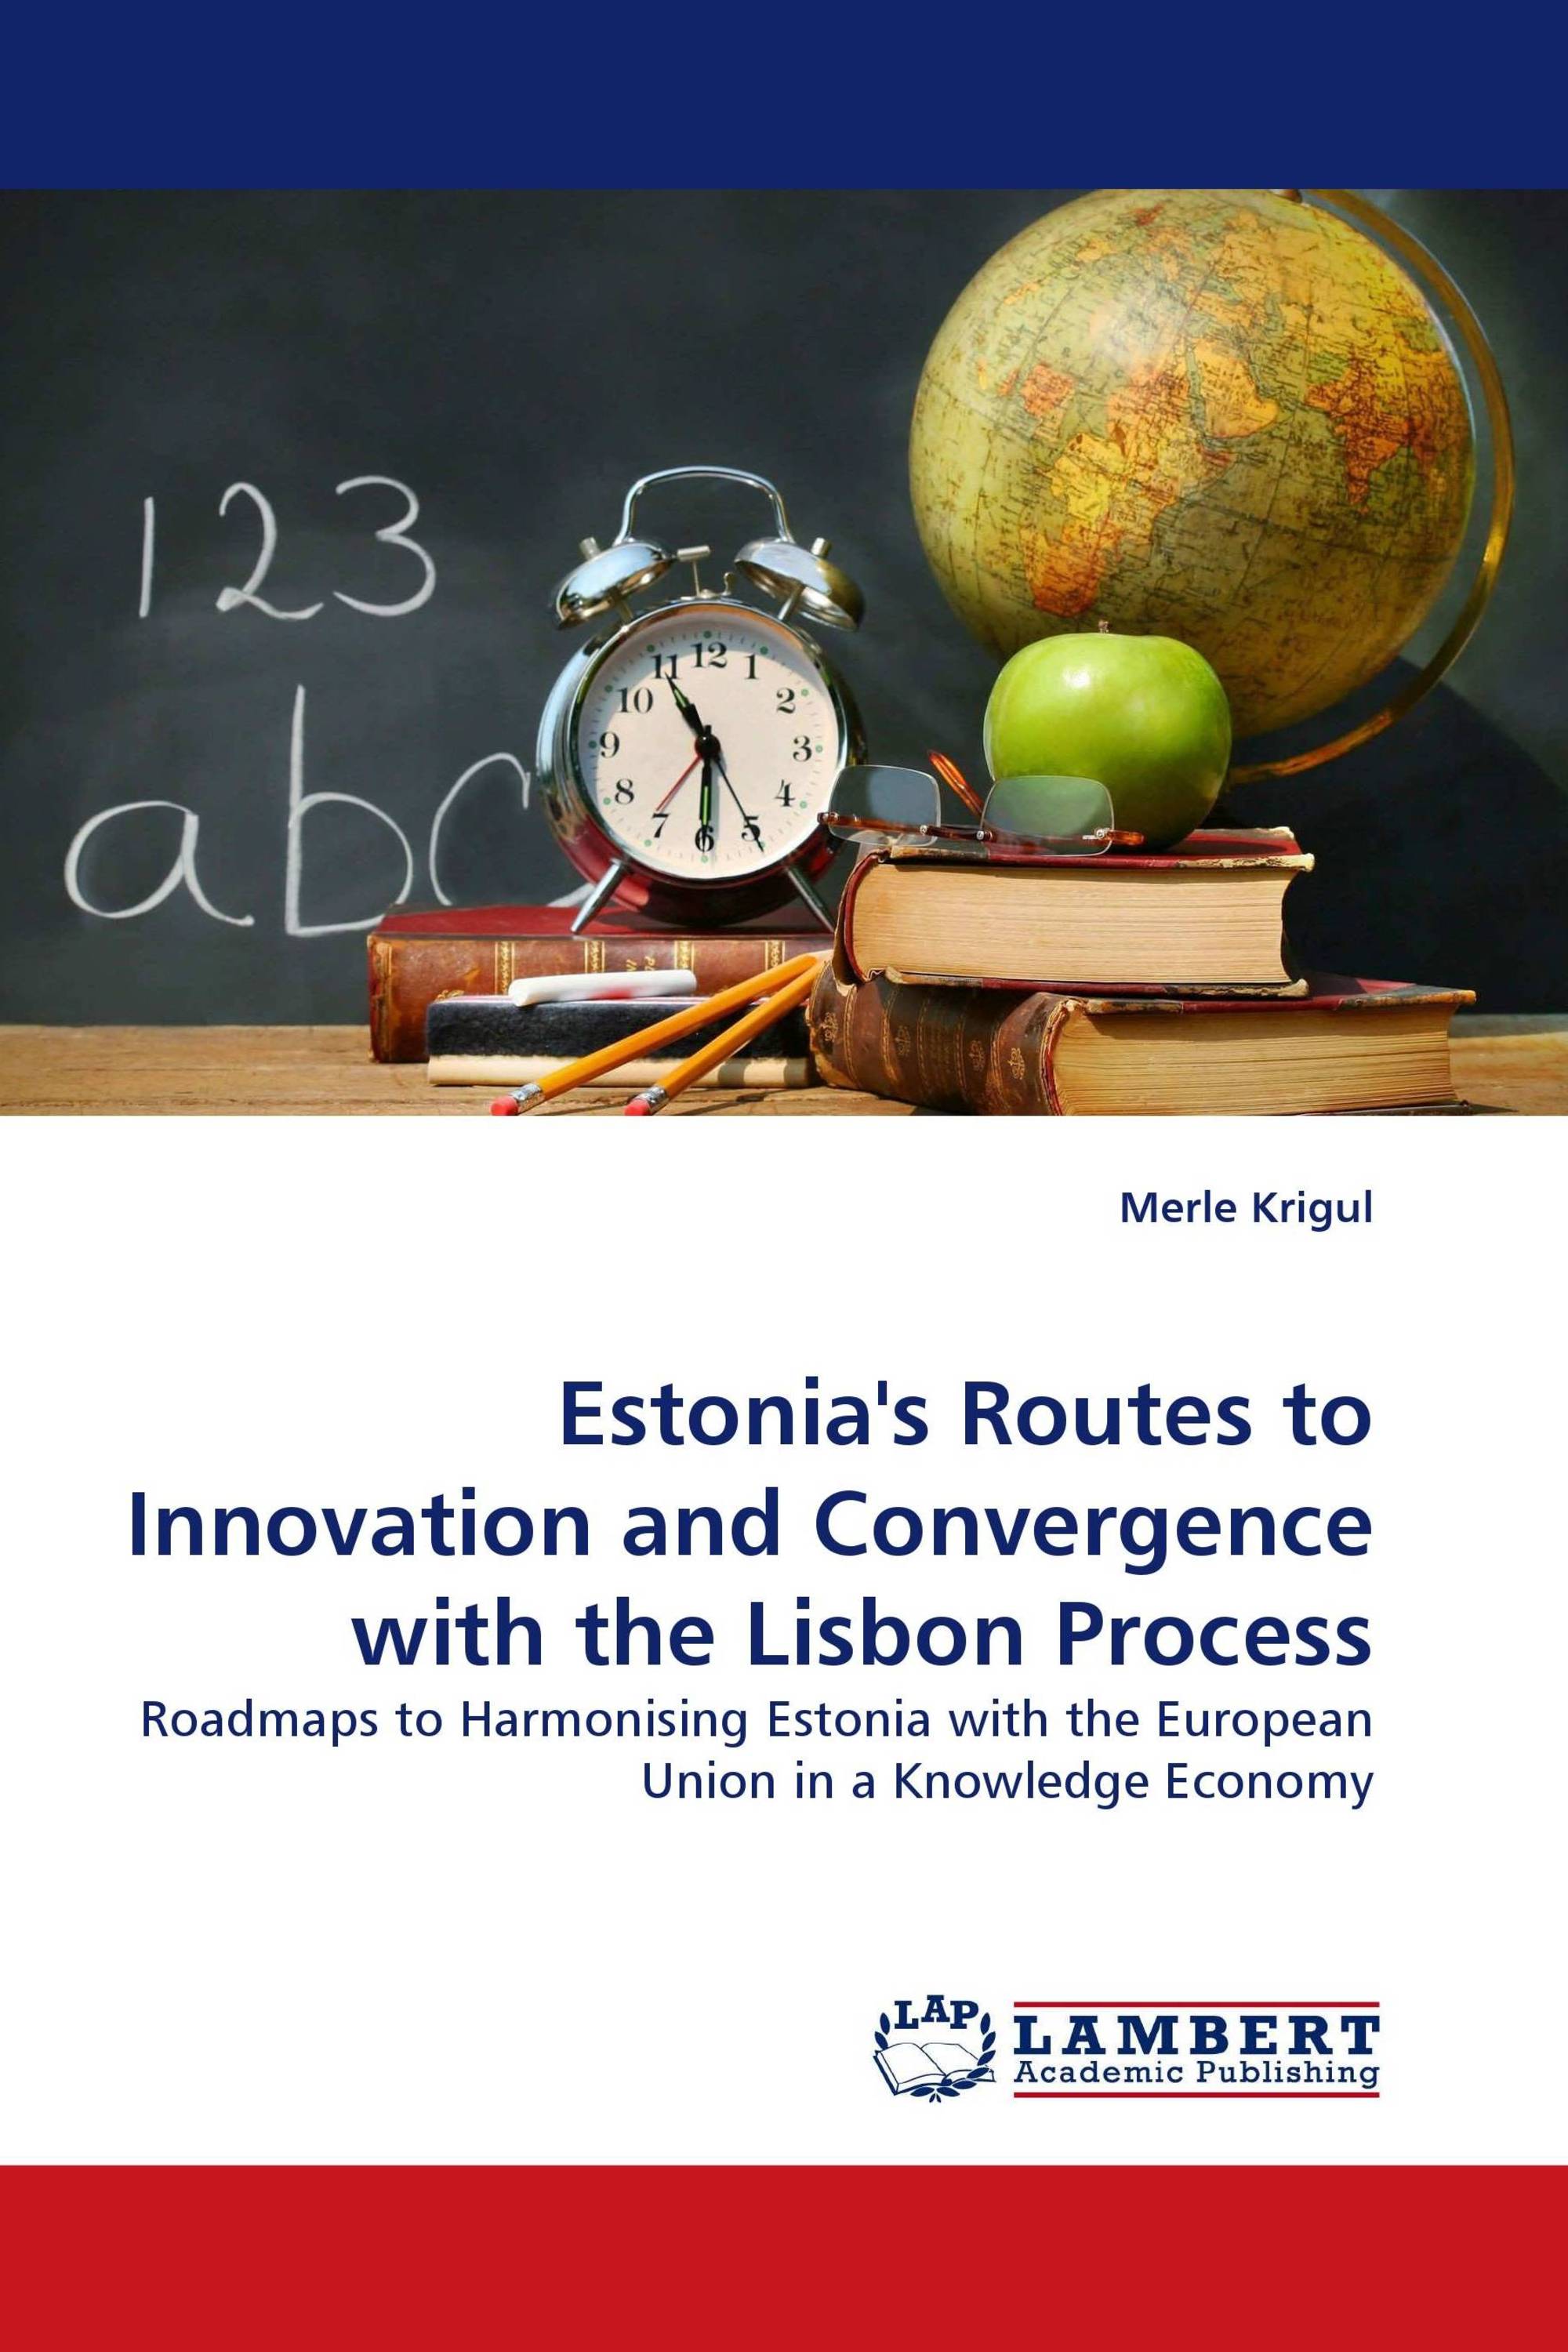 Estonia''s Routes to Innovation and Convergence with the Lisbon Process